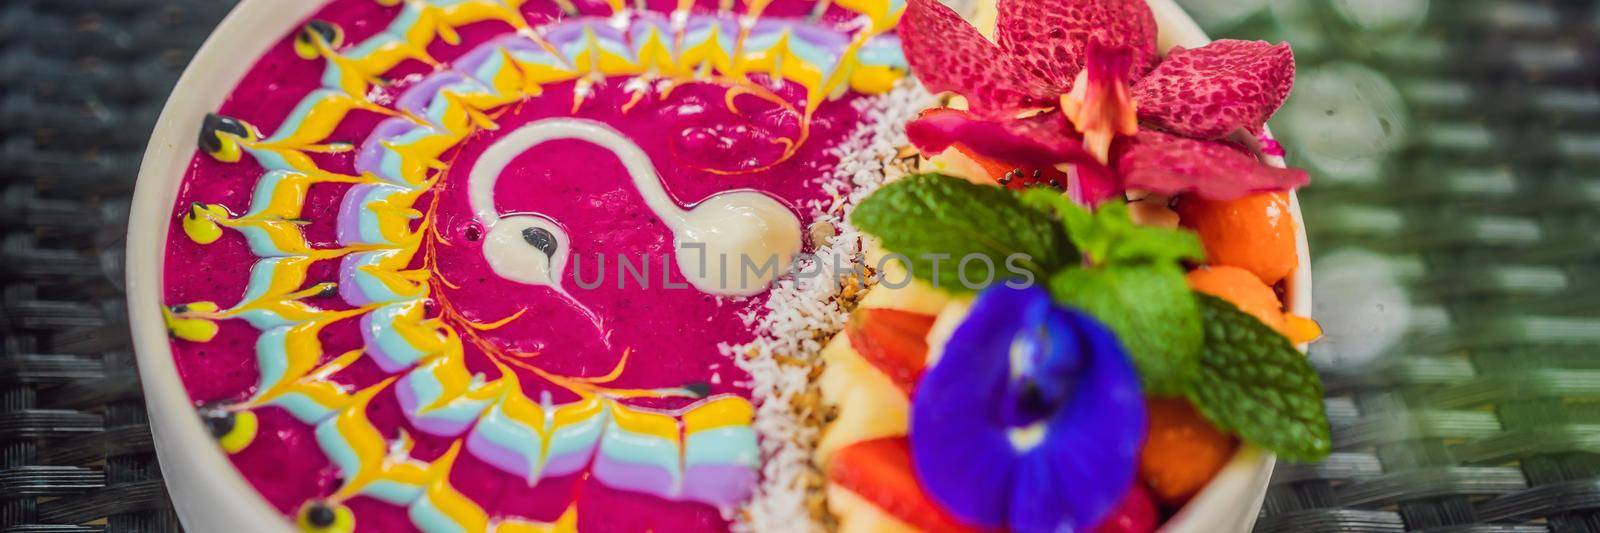 BANNER, LONG FORMAT Healthy tropical breakfast, smoothie bowl with tropical fruits, decorated with a pattern of colorful yogurt with turmeric and spirulina. It is also decorated with fruits, flowers, chia seeds, coconut, granola, pineapple, mint and strawberries.